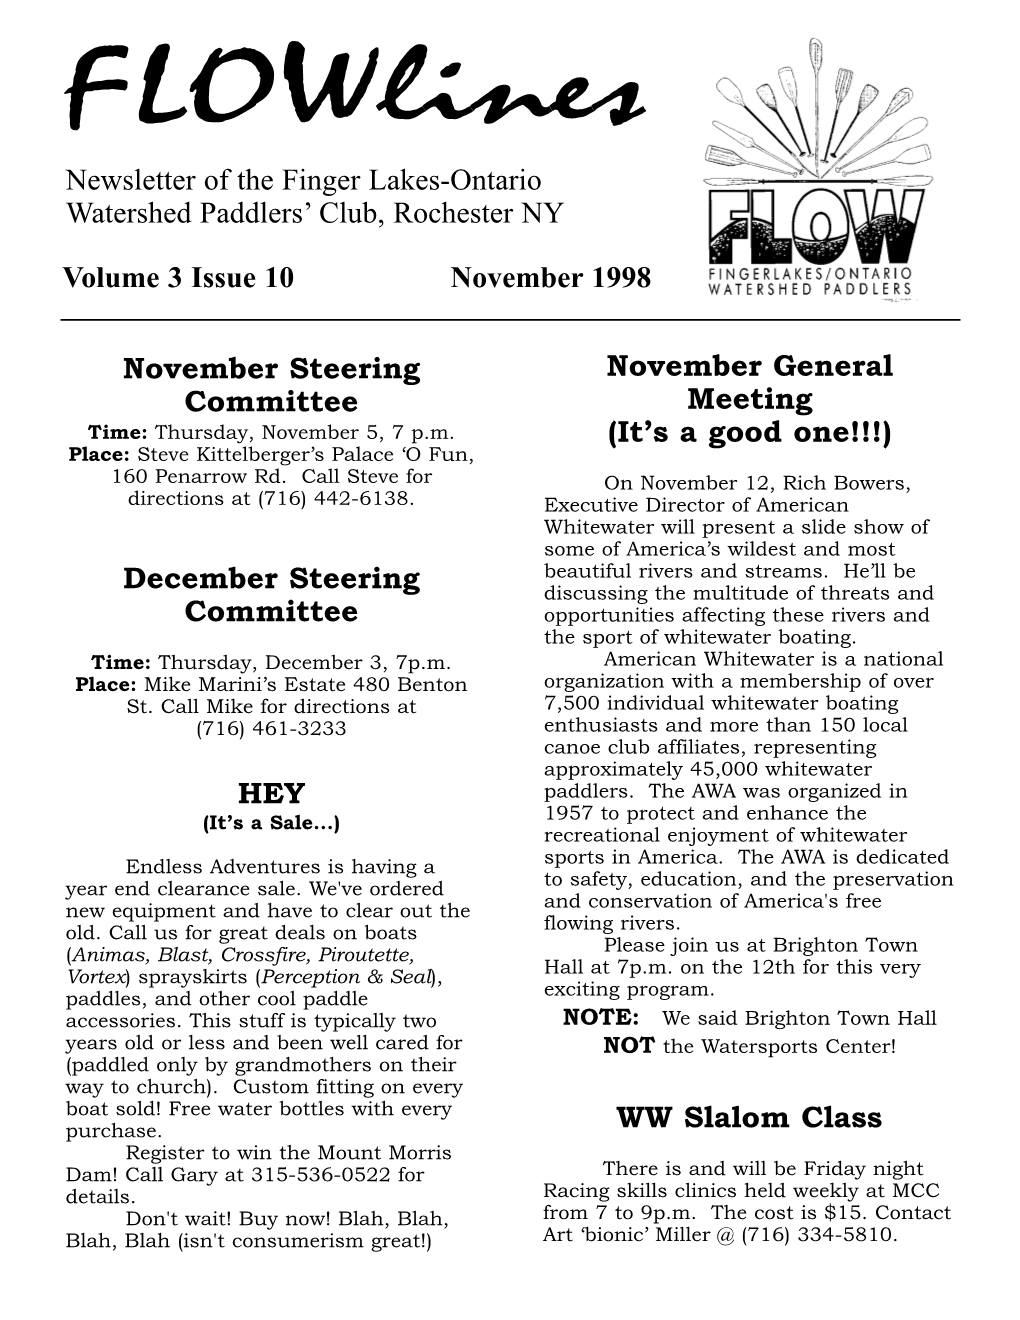 Newsletter of the Finger Lakes-Ontario Watershed Paddlers’ Club, Rochester NY